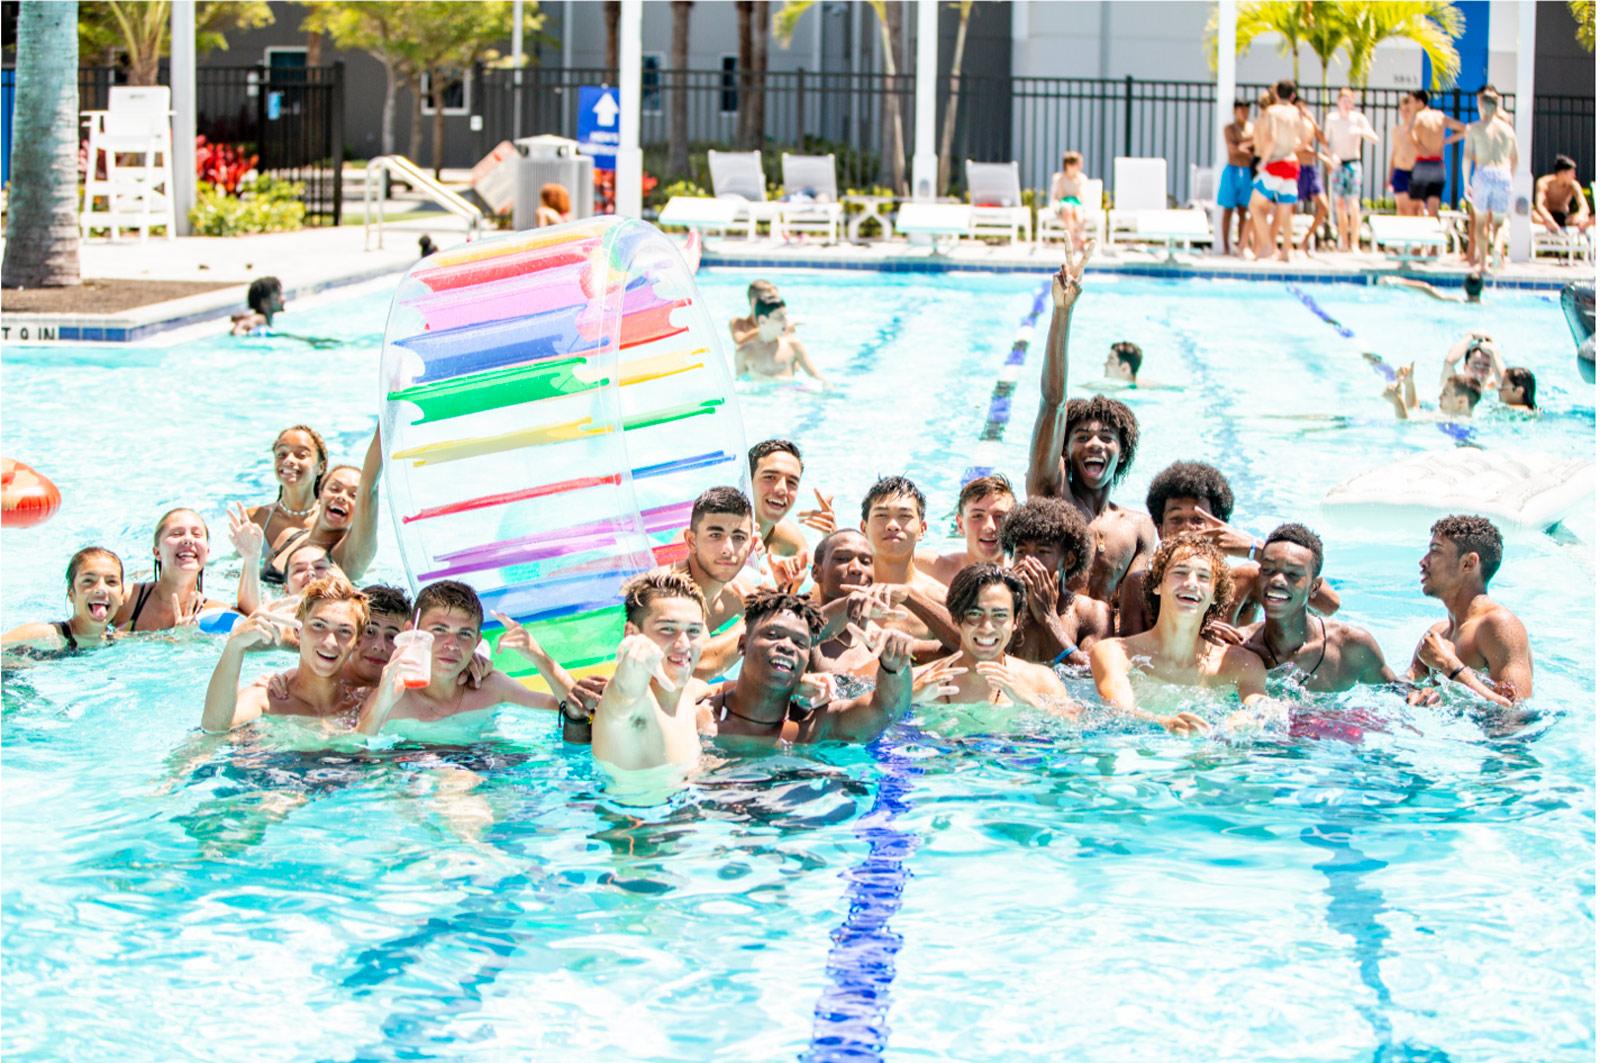 IMG Academy campers relaxing in the pool